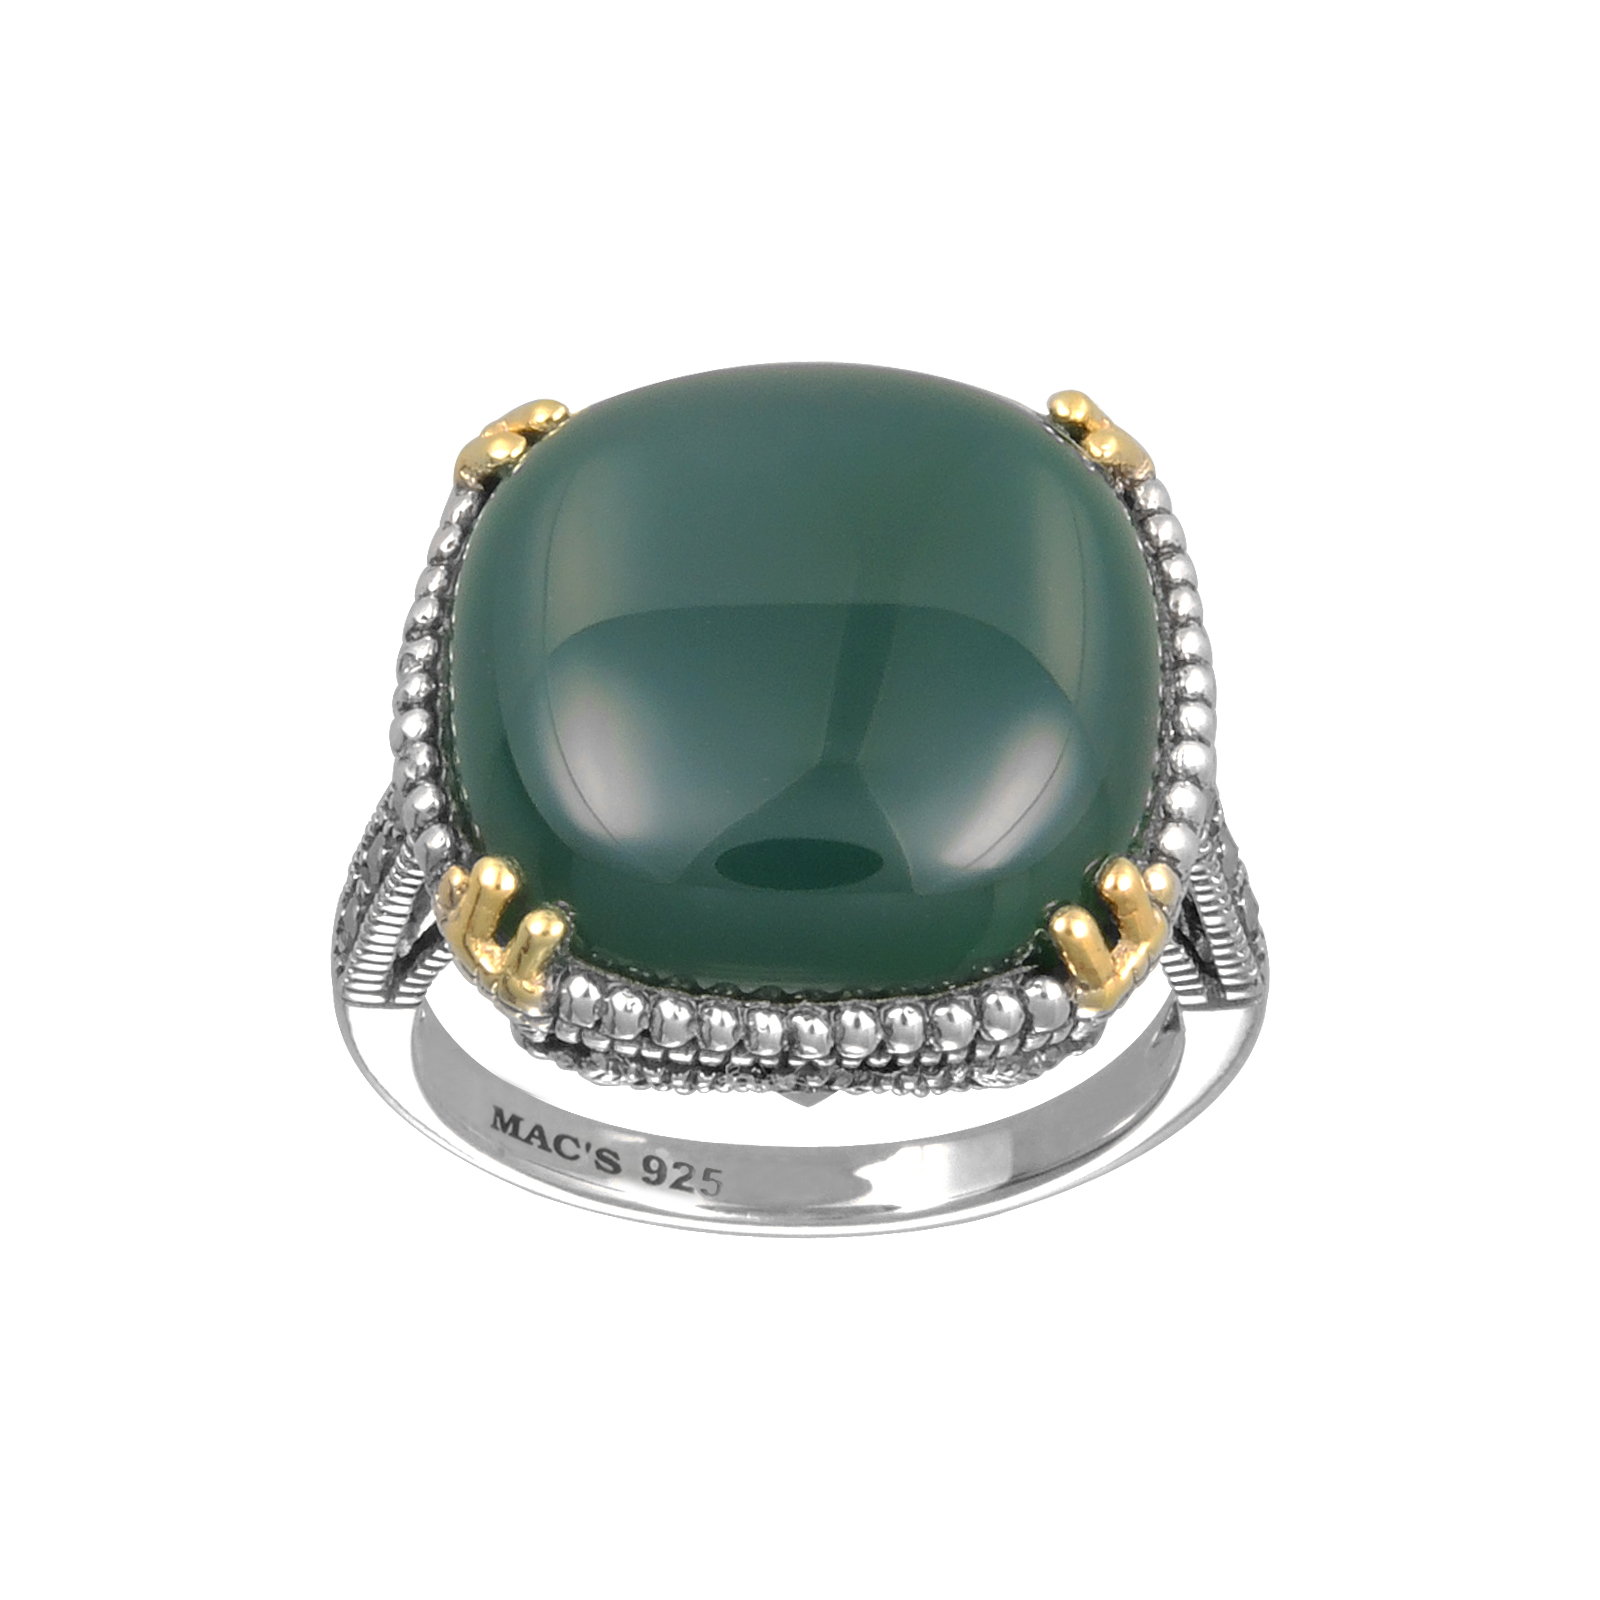 Mac's Cabochon Square Cut Green Agate & Marcasite  accented with 14K Yellow Gold Prong Ring